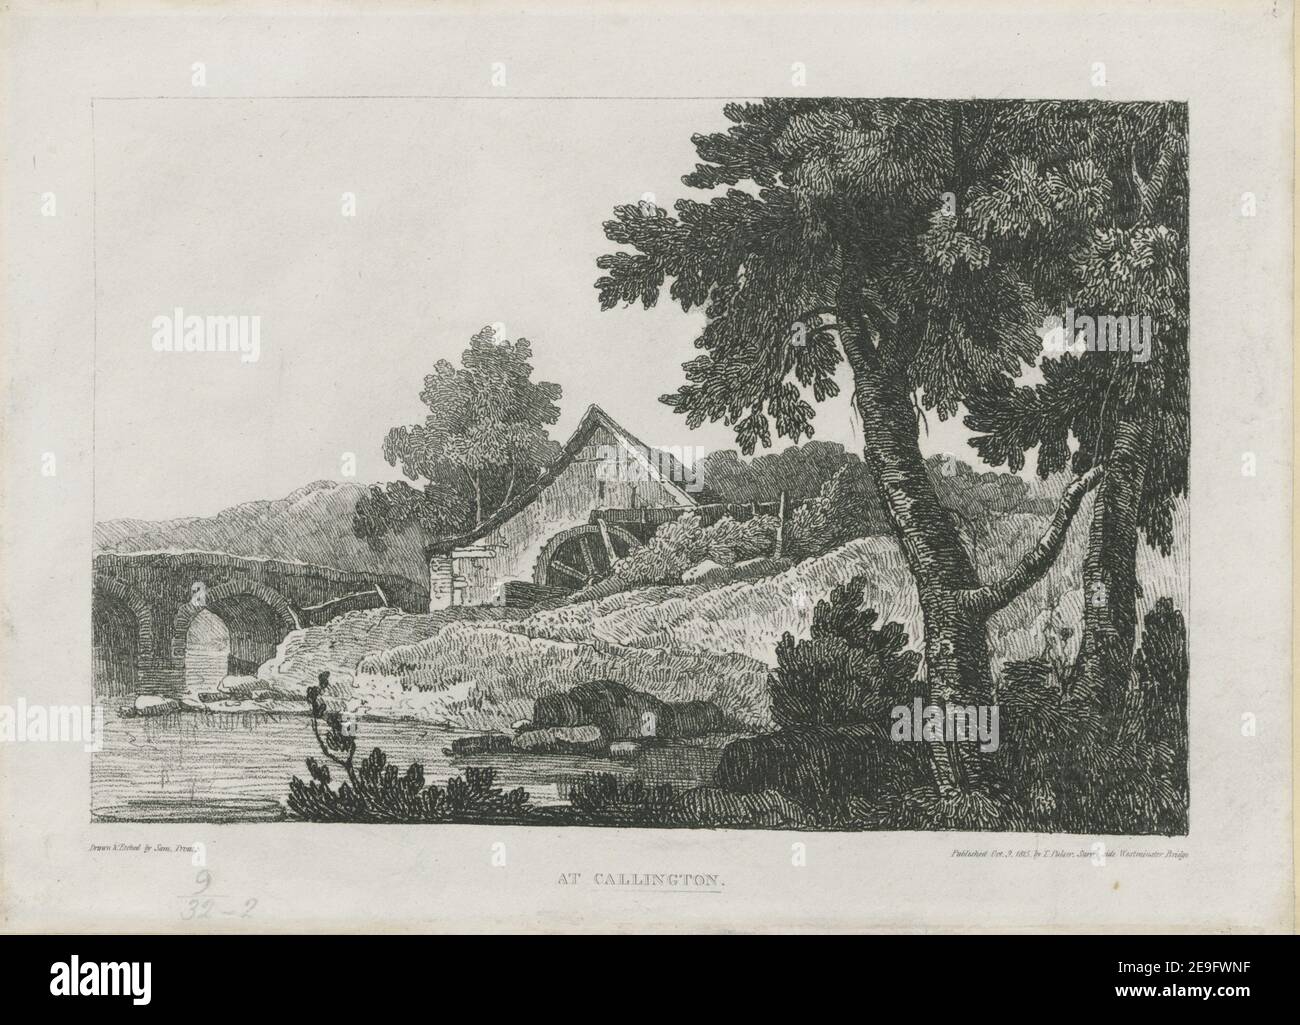 At Callington.  Author  Prout, Samuel 9.32.2. Place of publication: [London] Publisher: Published Oct. 3 1815, by T Palser, Surrey side, Westminster Bridge., Date of publication: [October 3 1815]  Item type: 1 print Medium: soft-ground etching Dimensions: sheet 24.7 x 34.4 cm  Former owner: George III, King of Great Britain, 1738-1820 Stock Photo